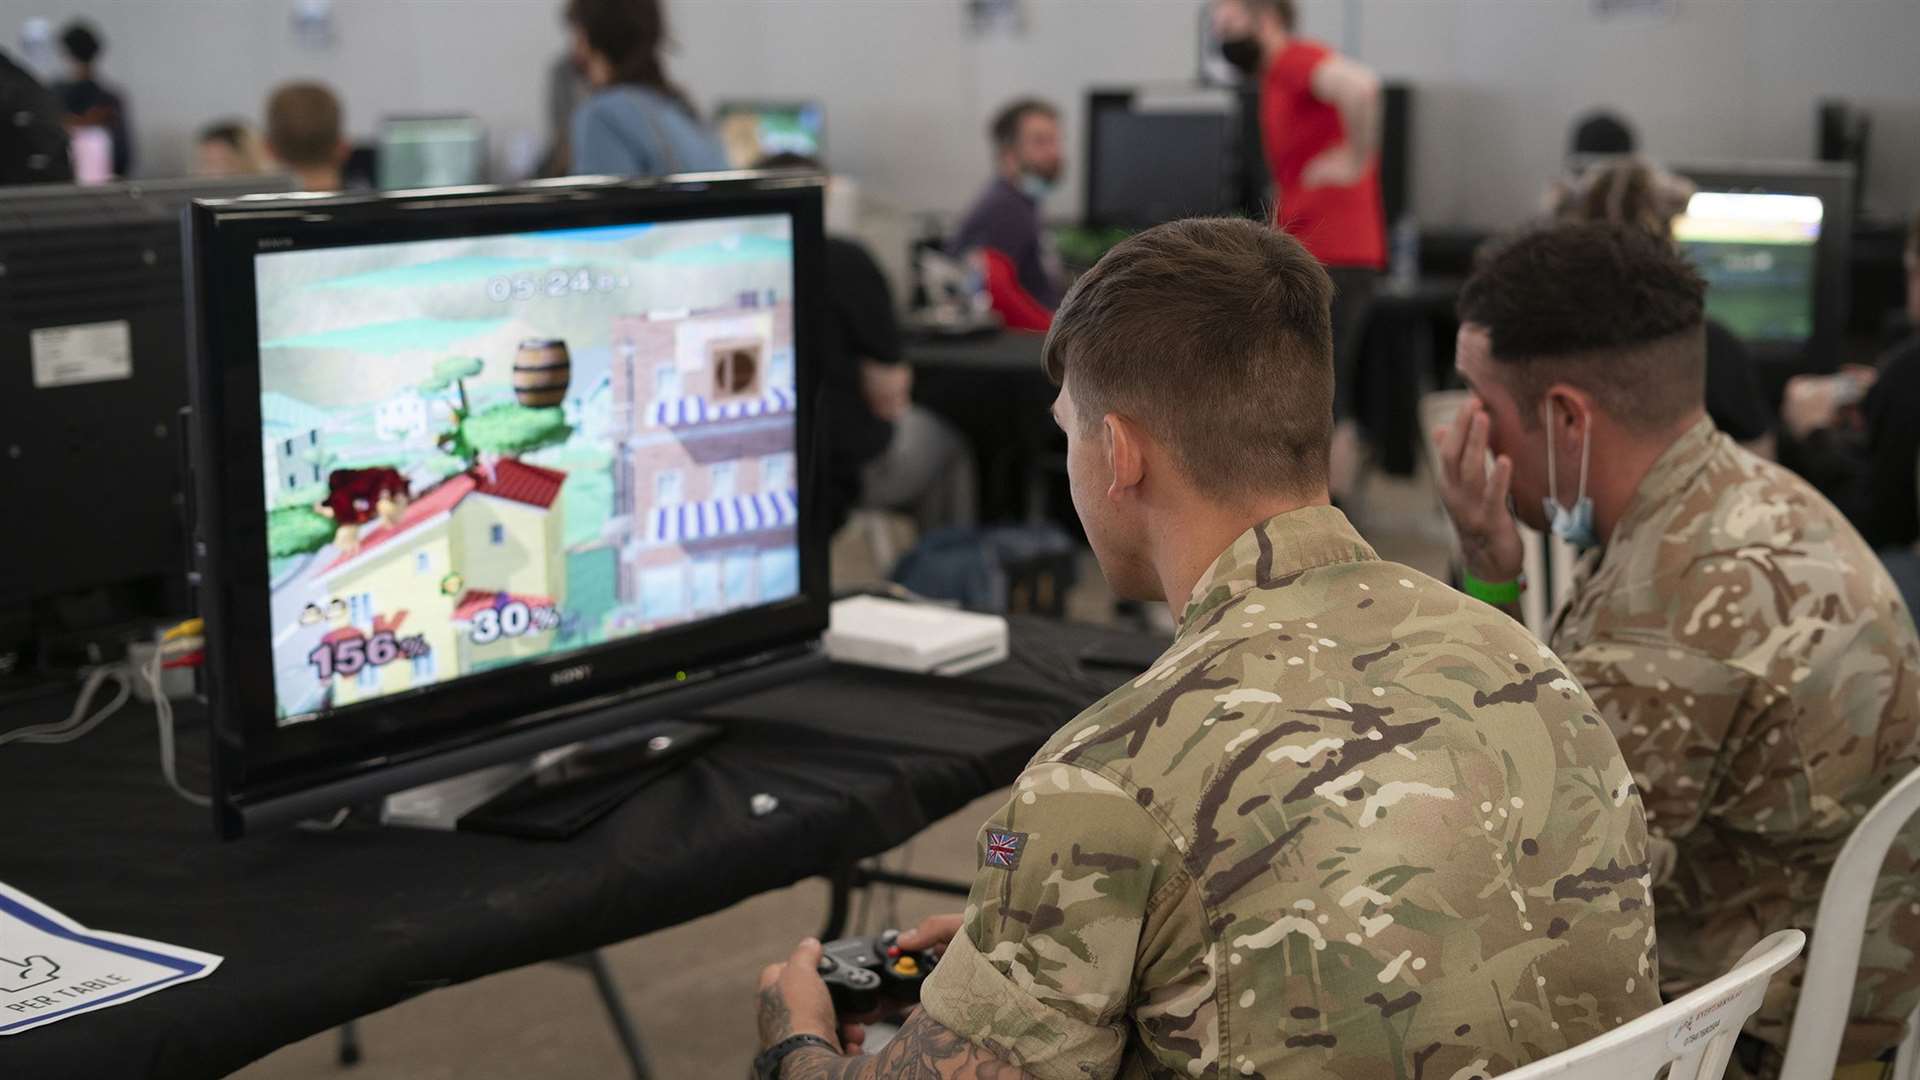 Visitors can play games, attend talks and learn about what goes into making a video game. Picture: Historic Dockyard Chatham